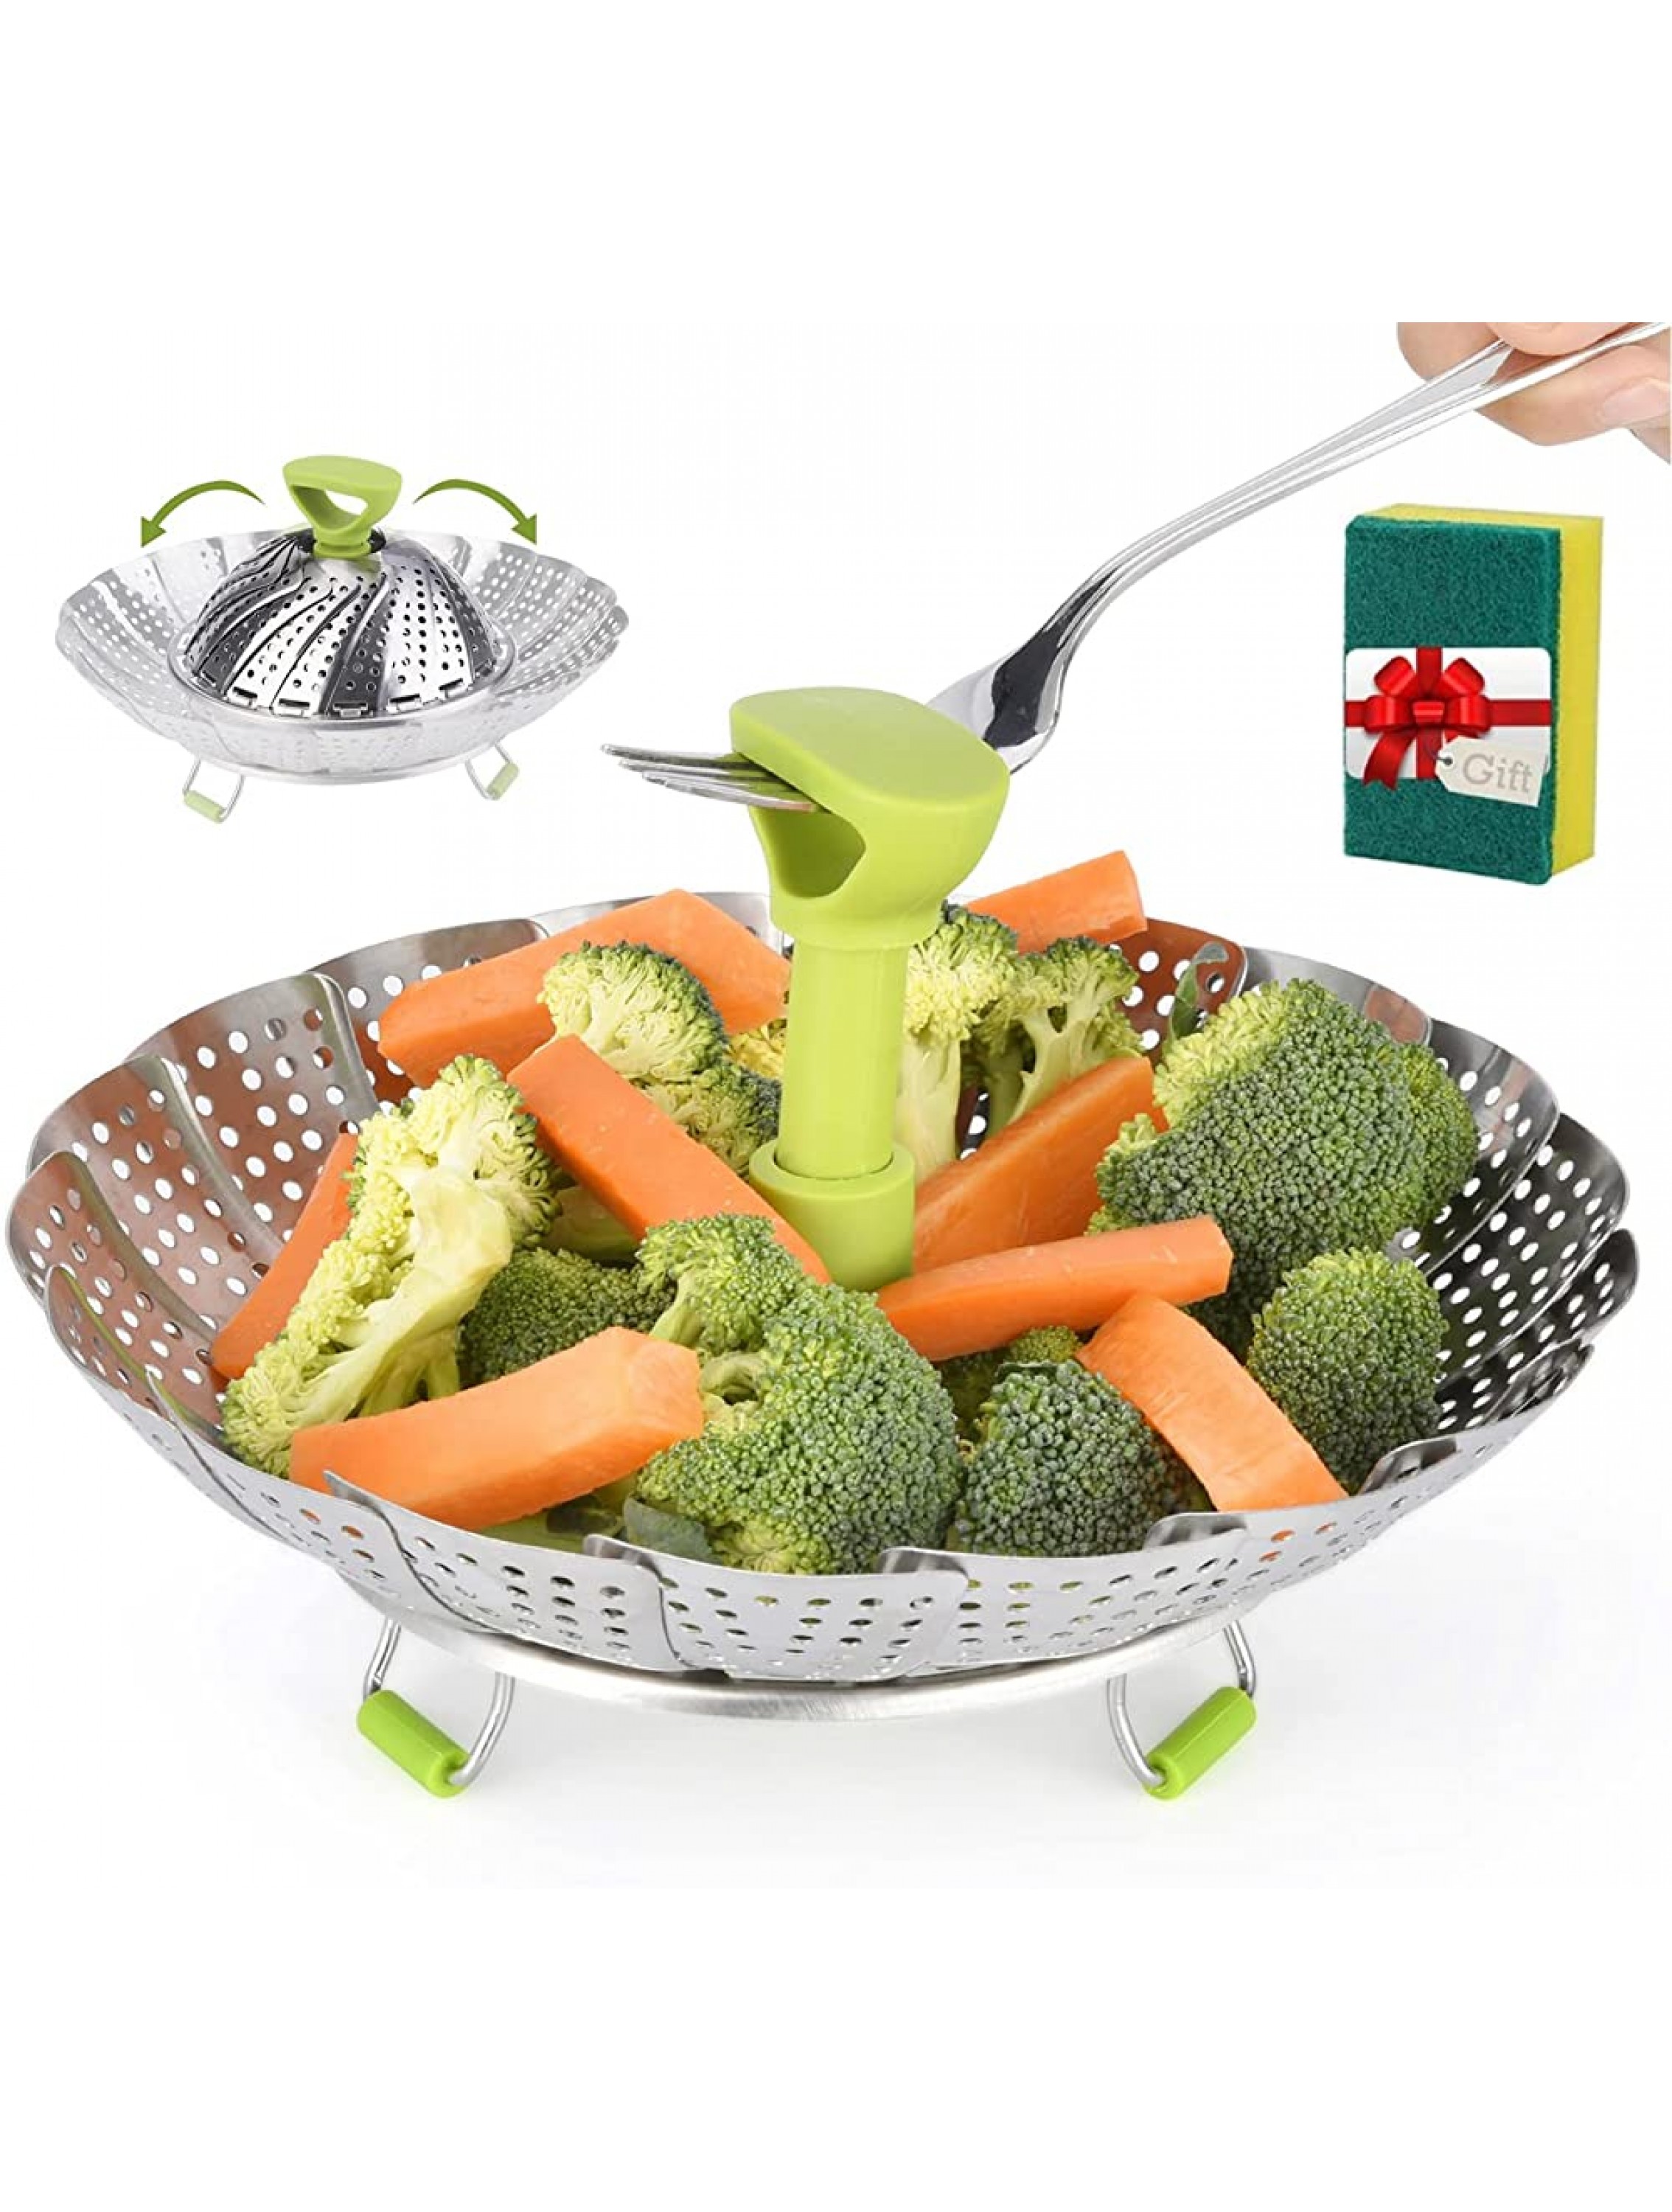 Stainless Steel Vegetable Veggie Steamer Basket For Instant Cooking Pot With Handle And Legs Foldable Food Container For Fish Oyster Crab Seafood Dumpling 5.1 Inch To 9 Inch Dishwasher Safe - BS39N73N9